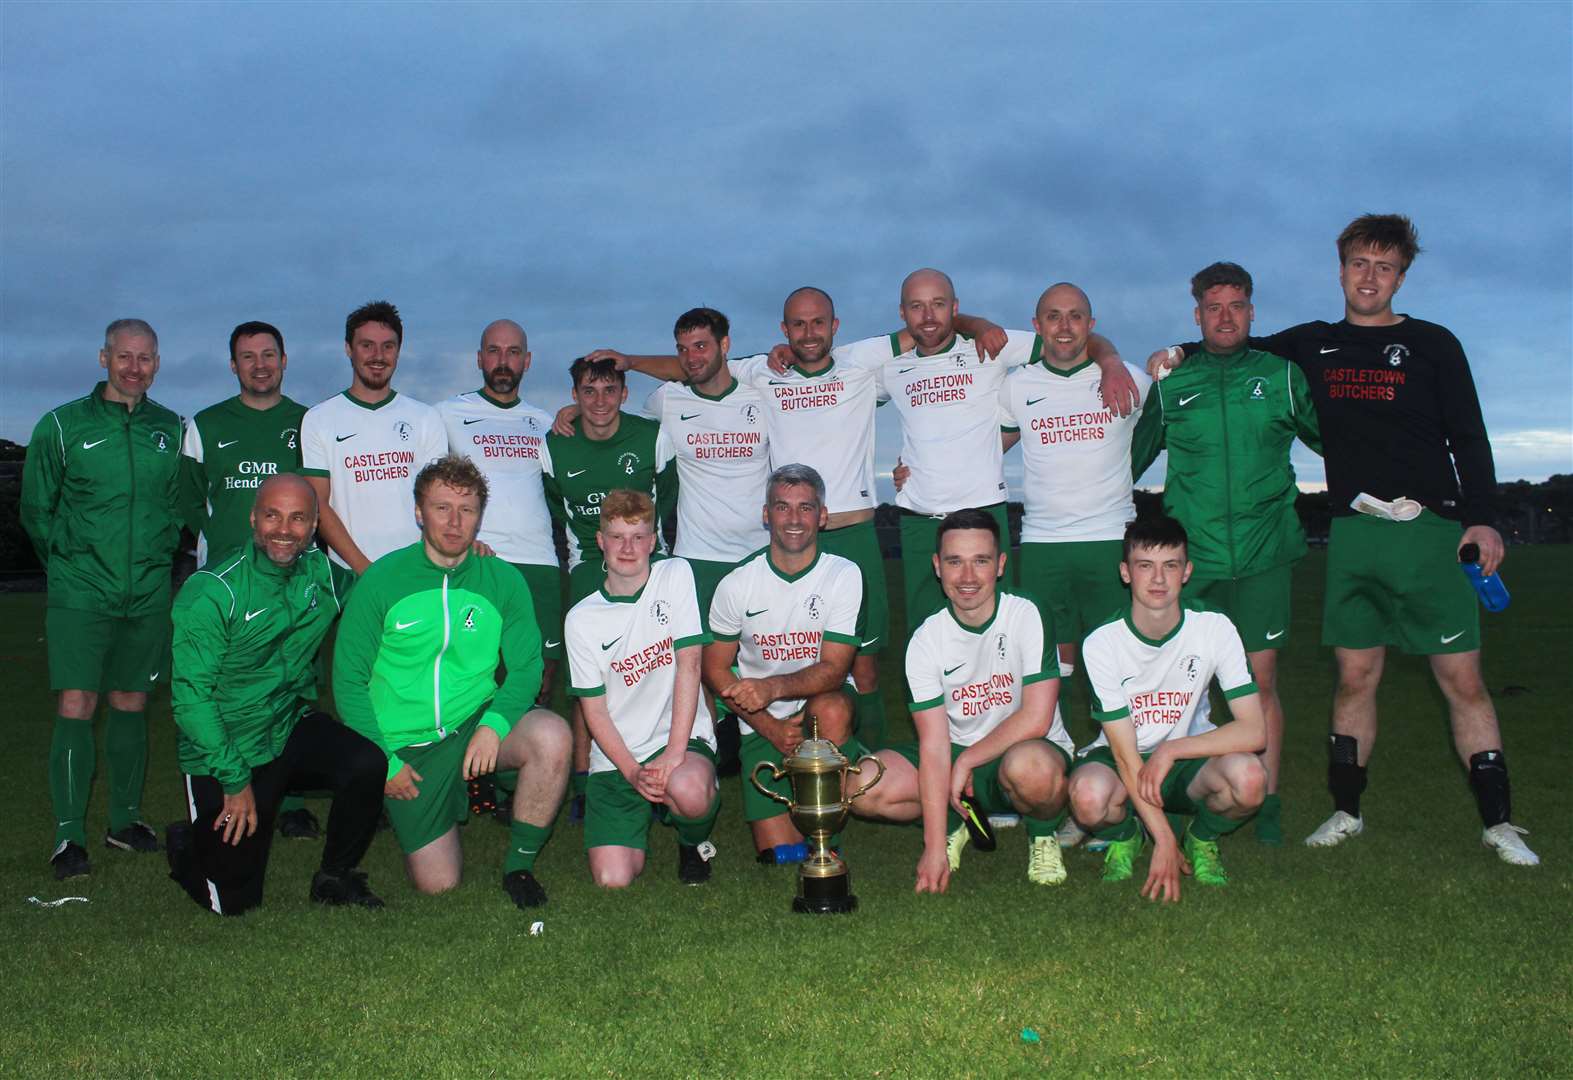 It's a proud wee club: McKenna relieved as Castletown stay in top division